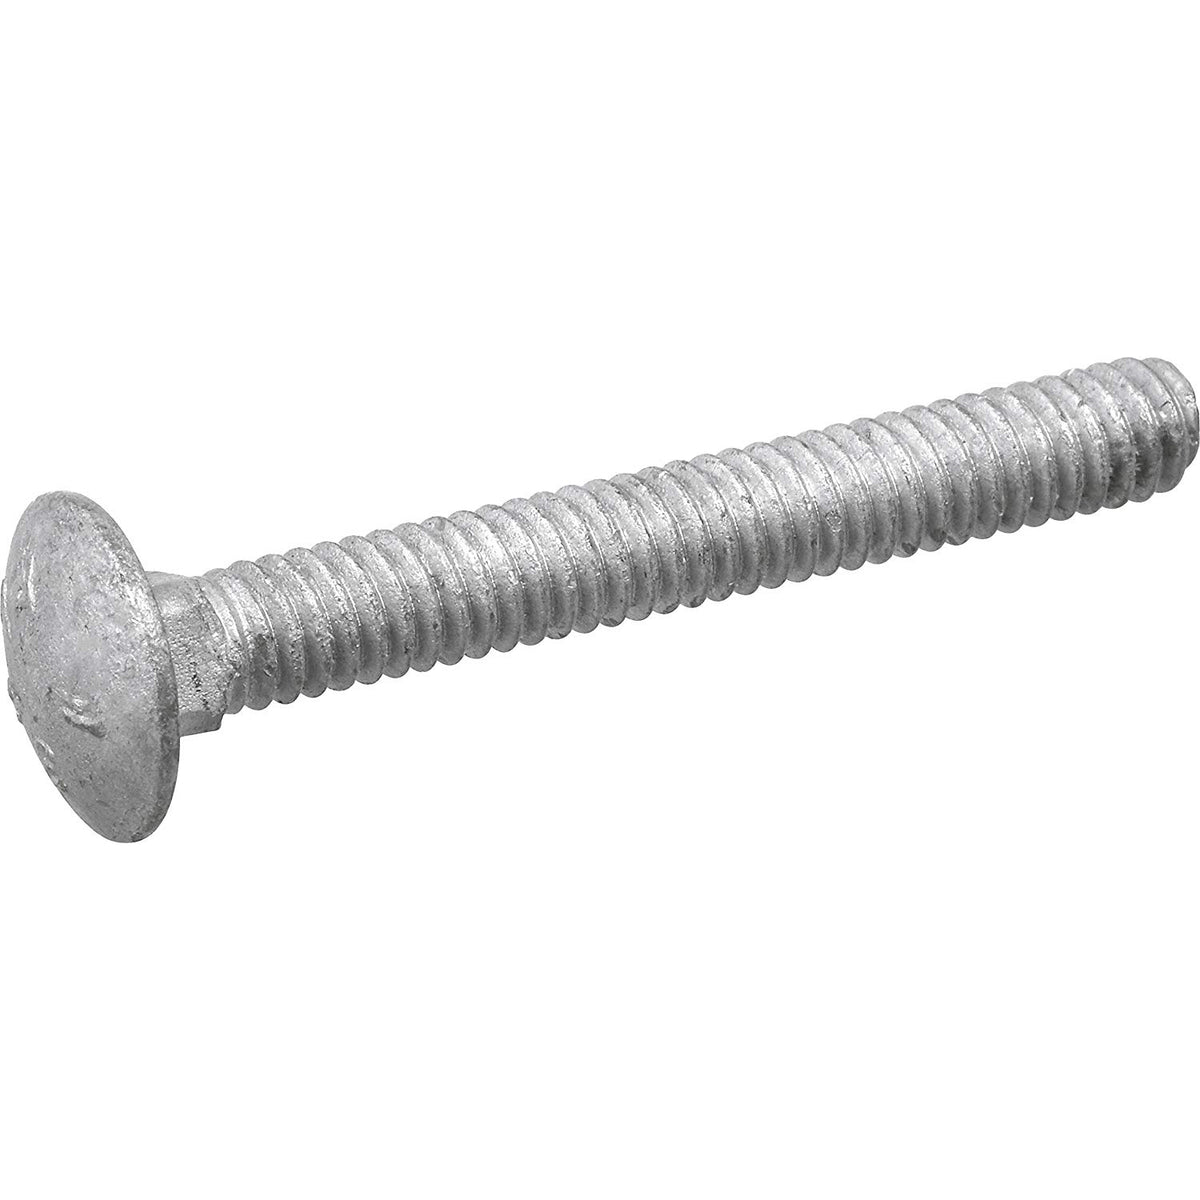 Hillman 812515 Flat Head Carriage Bolts, Galvanized, 1/4" x 2-1/2", 100-Count